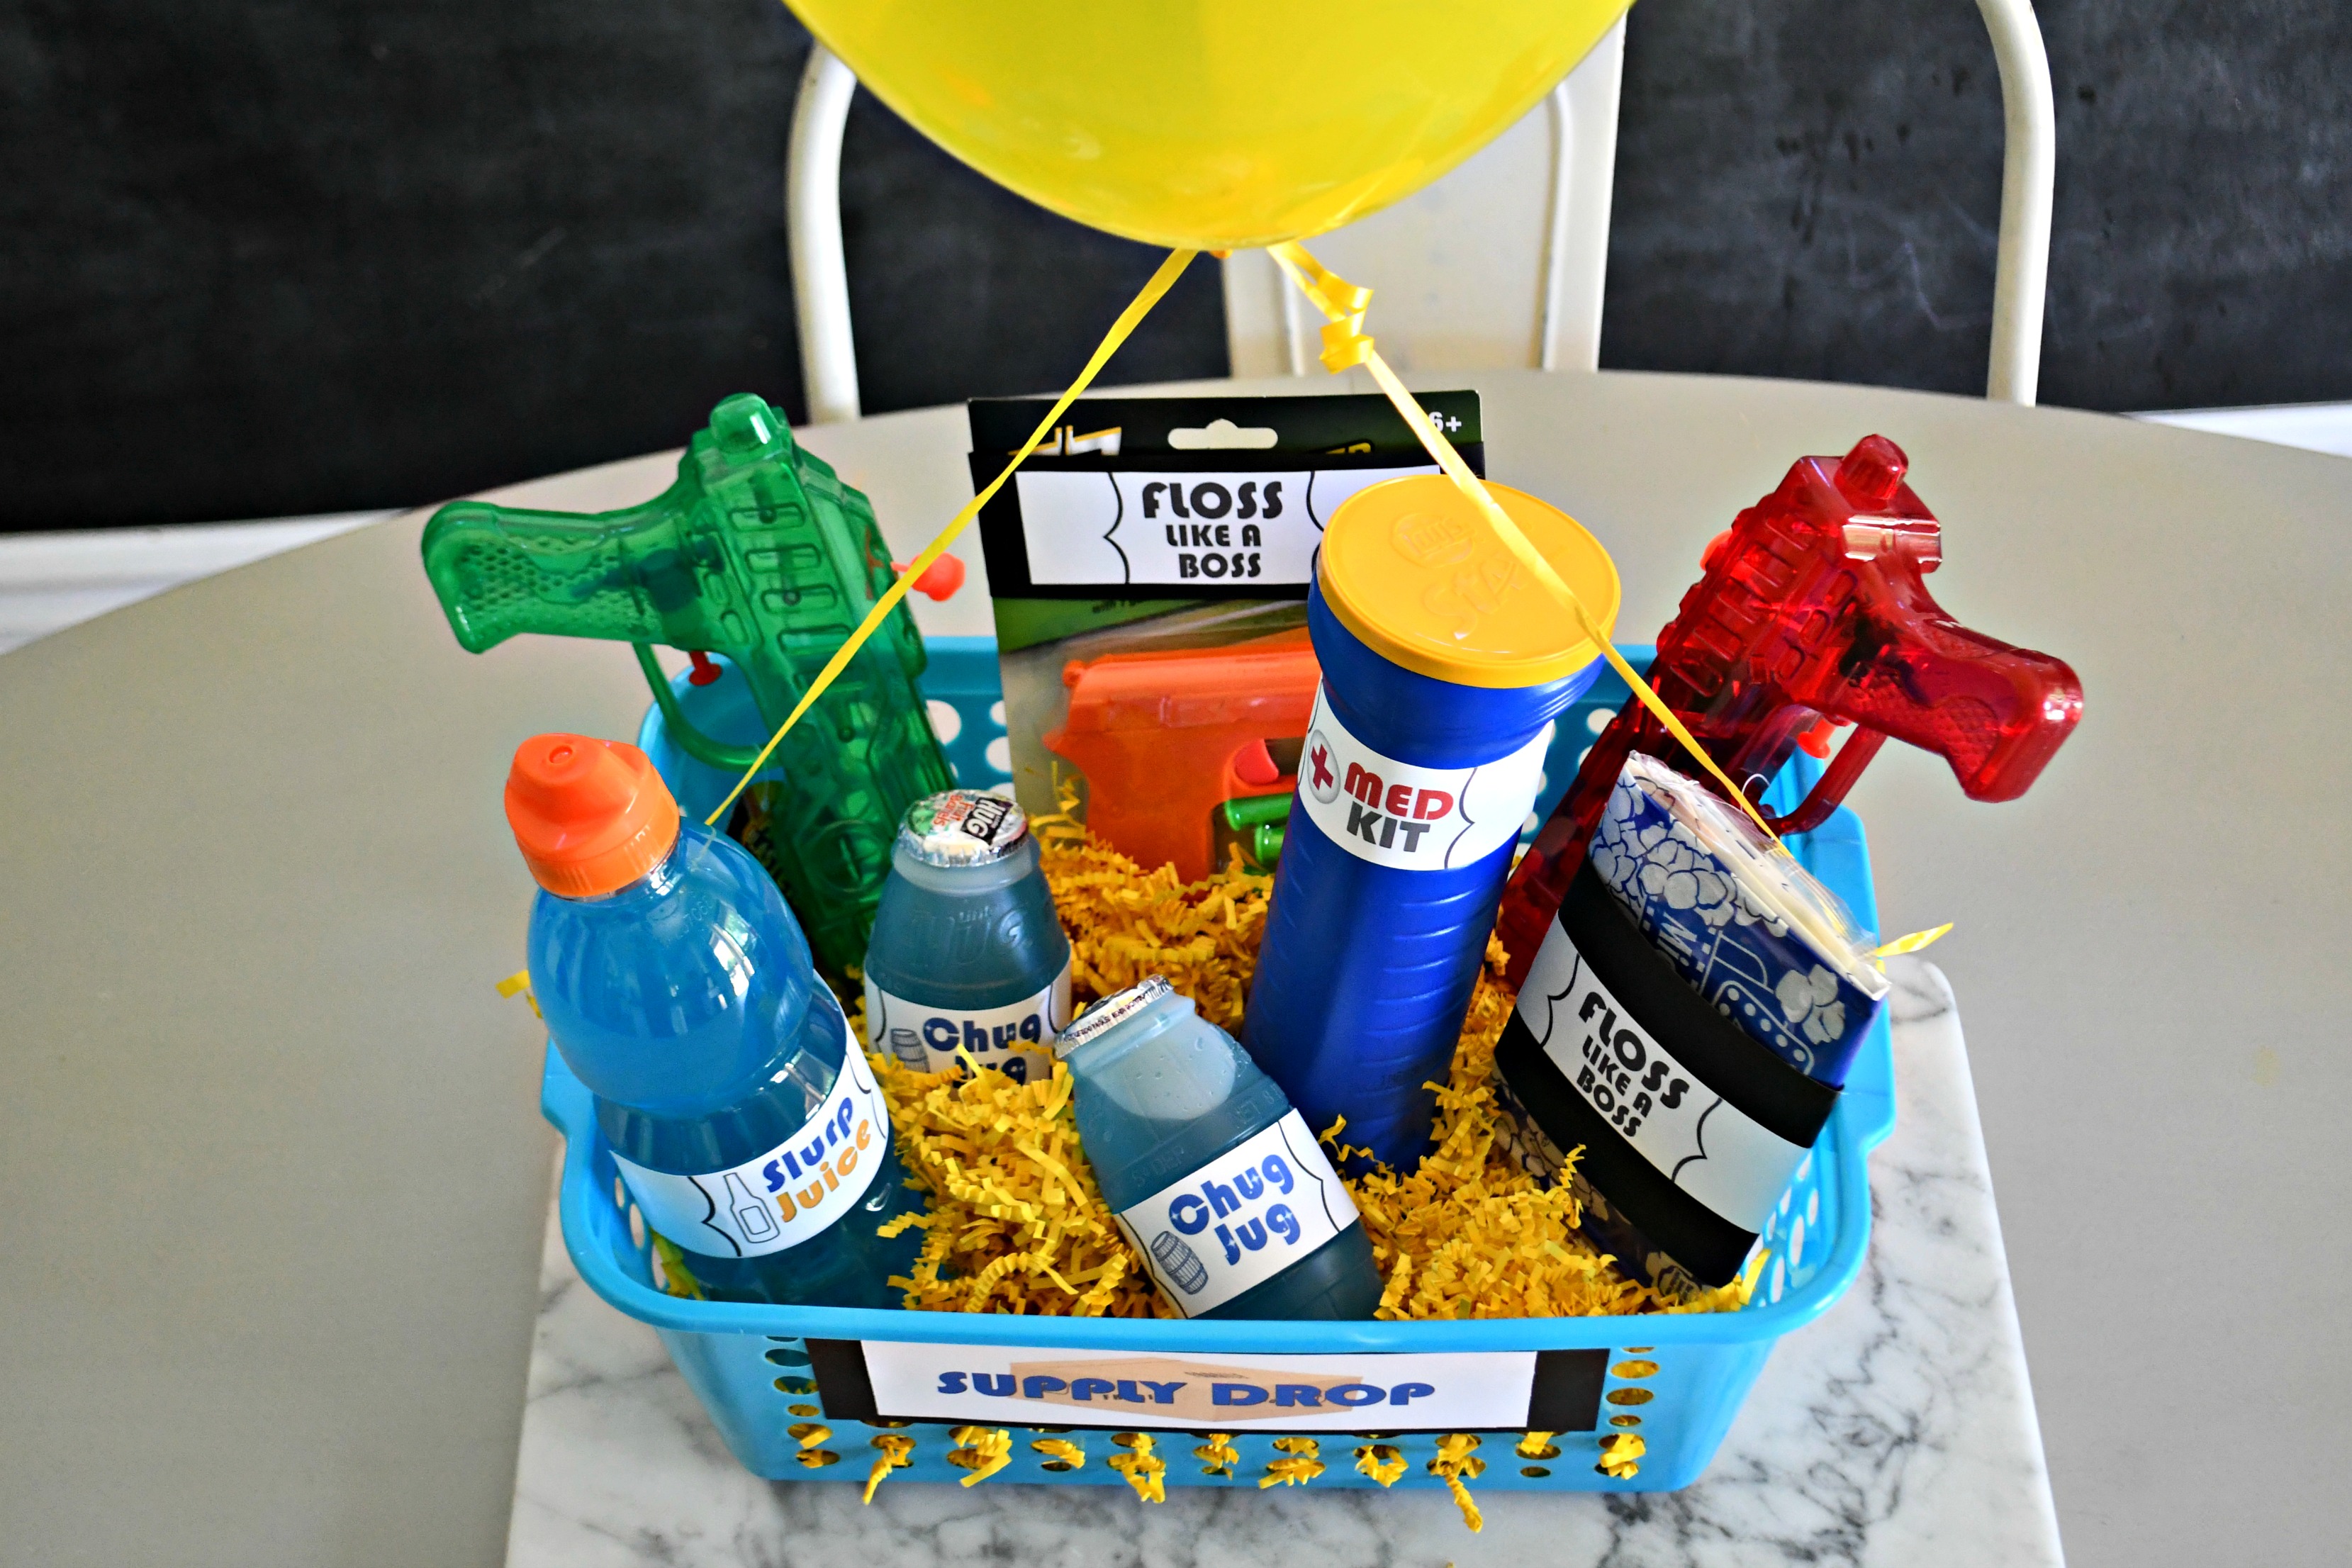 DIY Dollar Tree Fortnite Gift Basket in the supply drop basket with the balloon attached